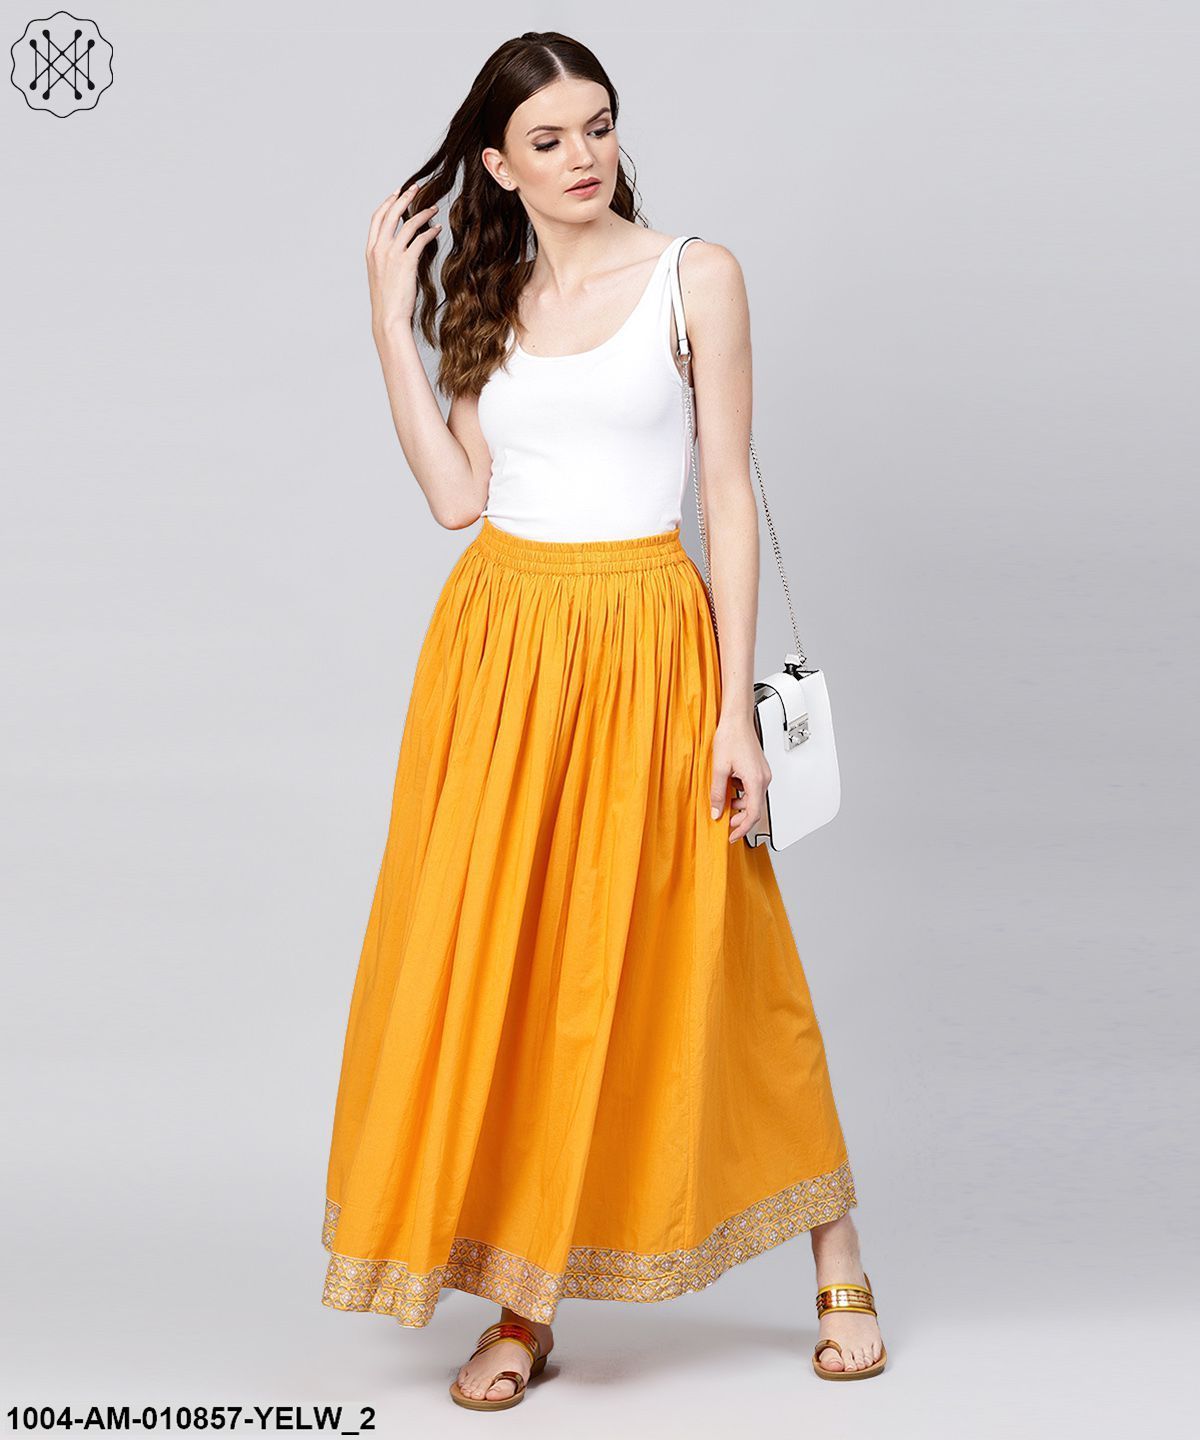 Yellow Ankle Length Cotton Flared Skirt